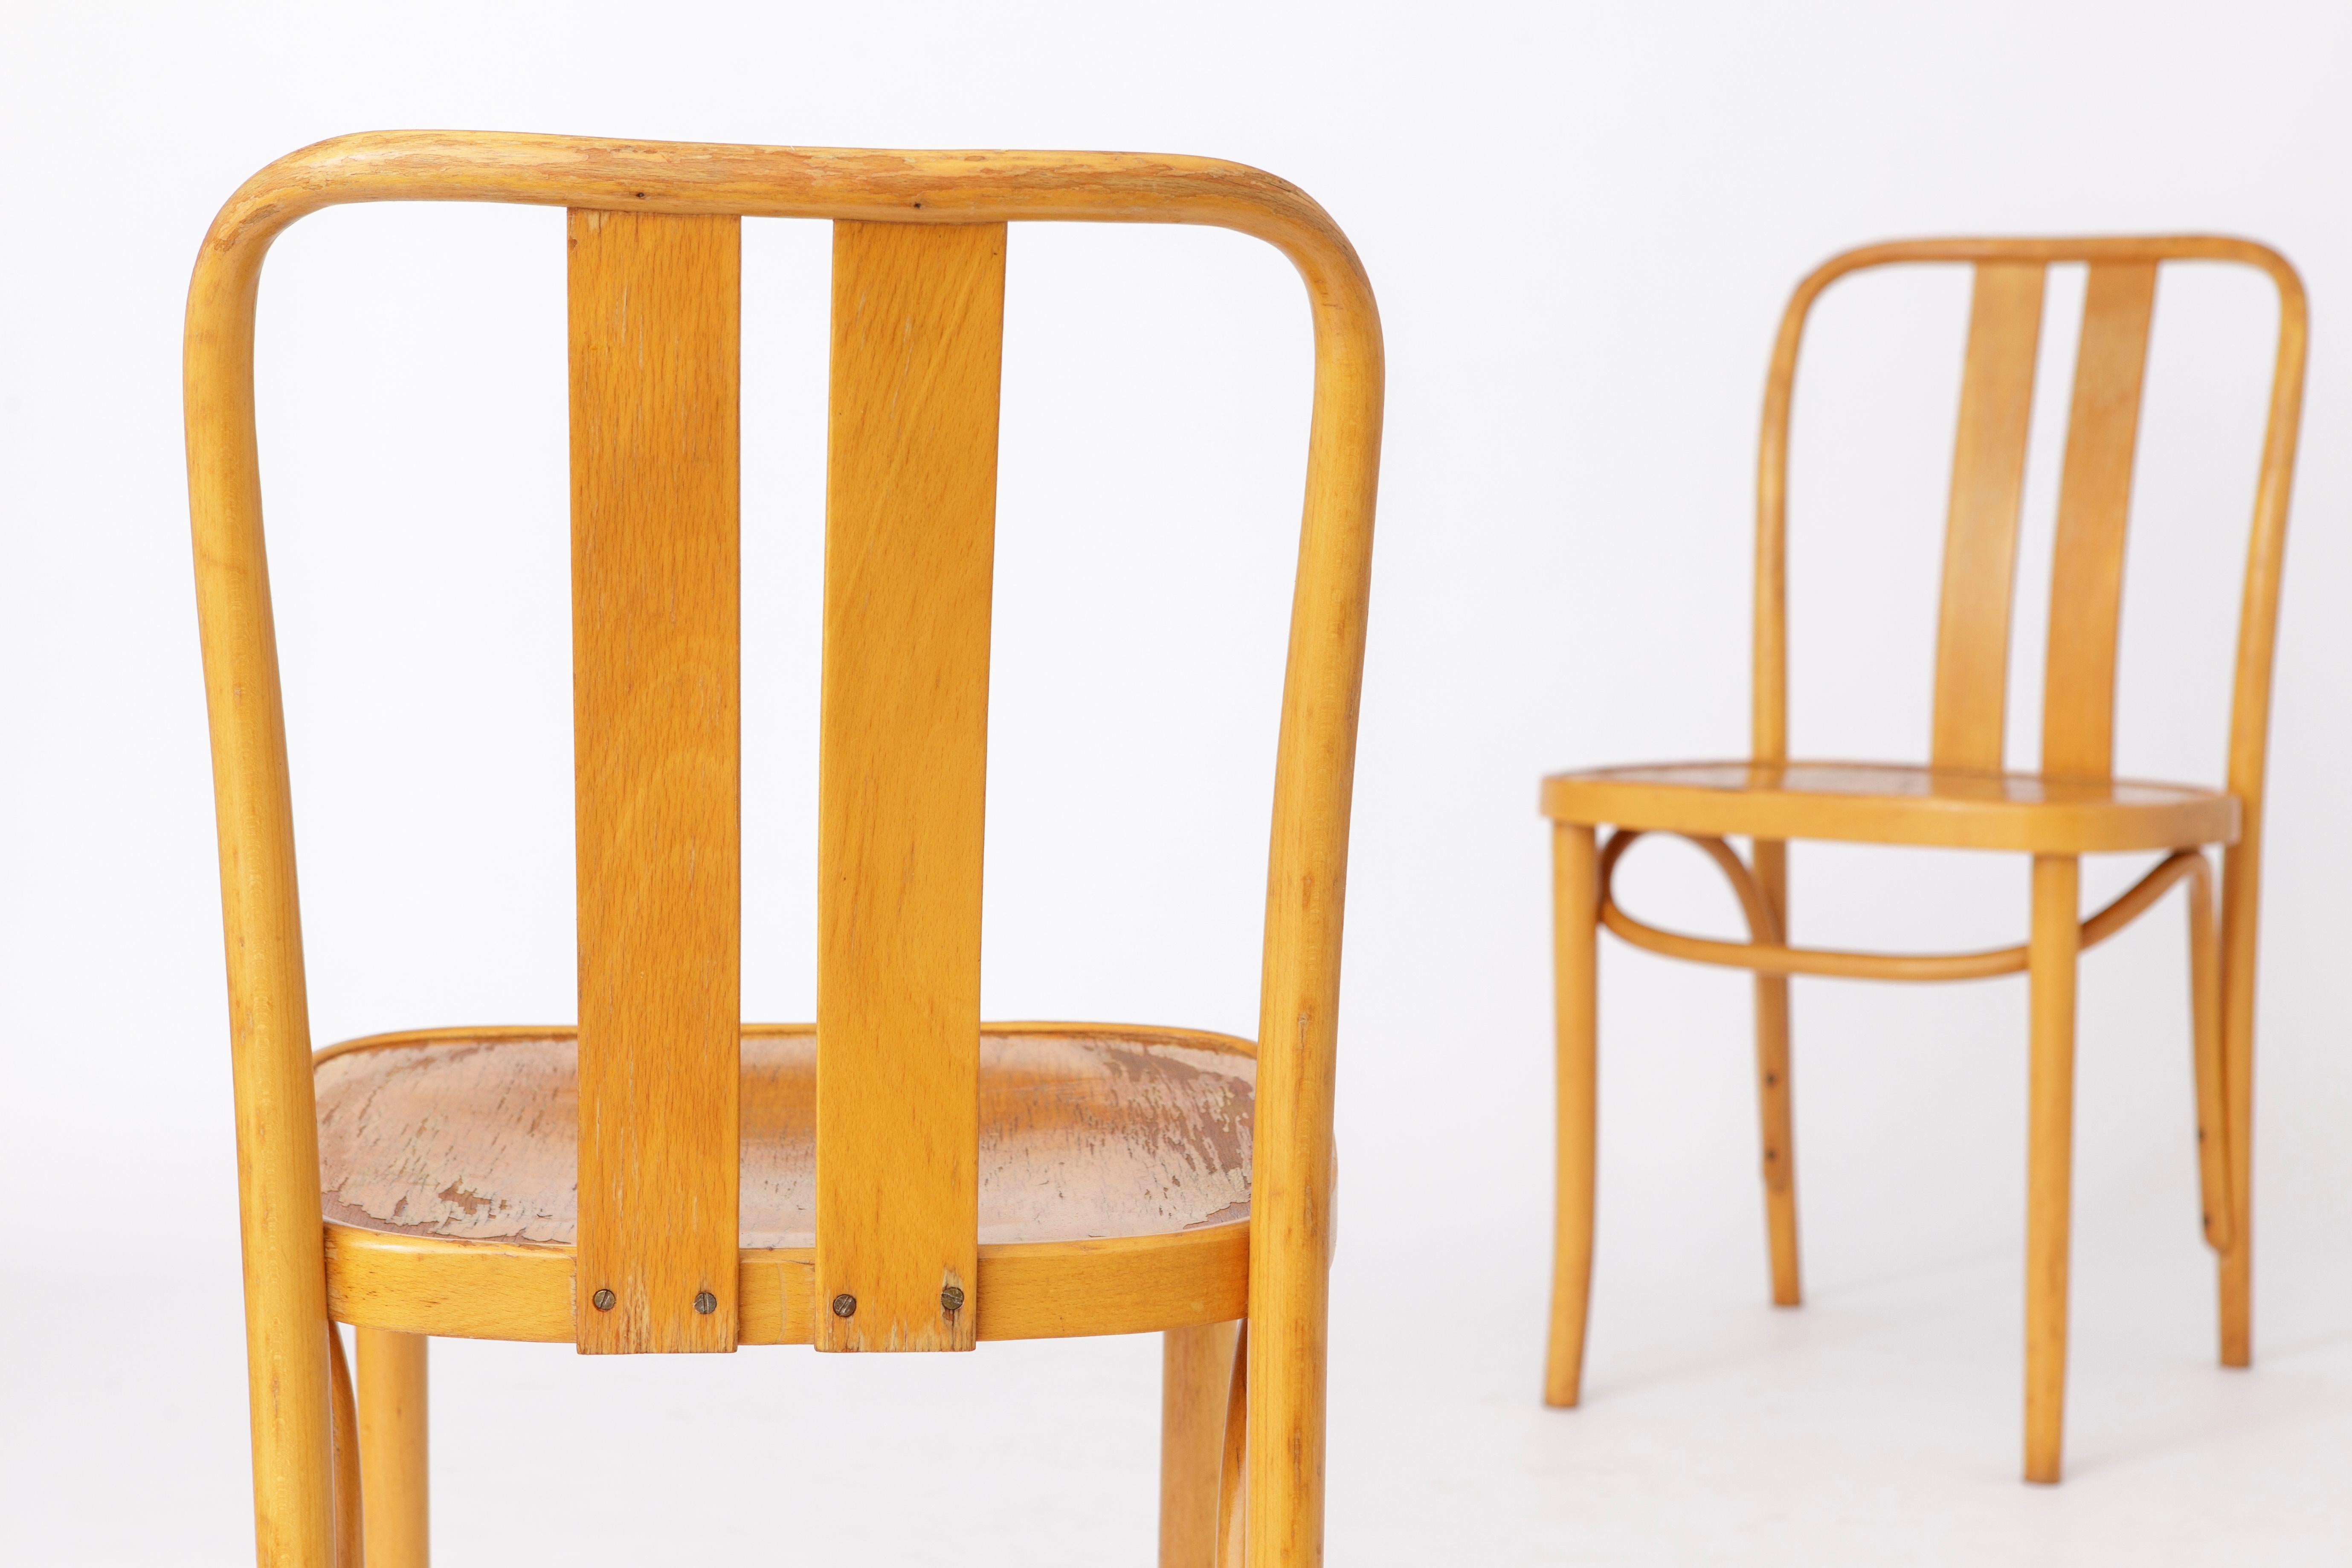 Polished 2 Vintage IKEA Chairs Lena by Radomsko 1970s Bentwood For Sale